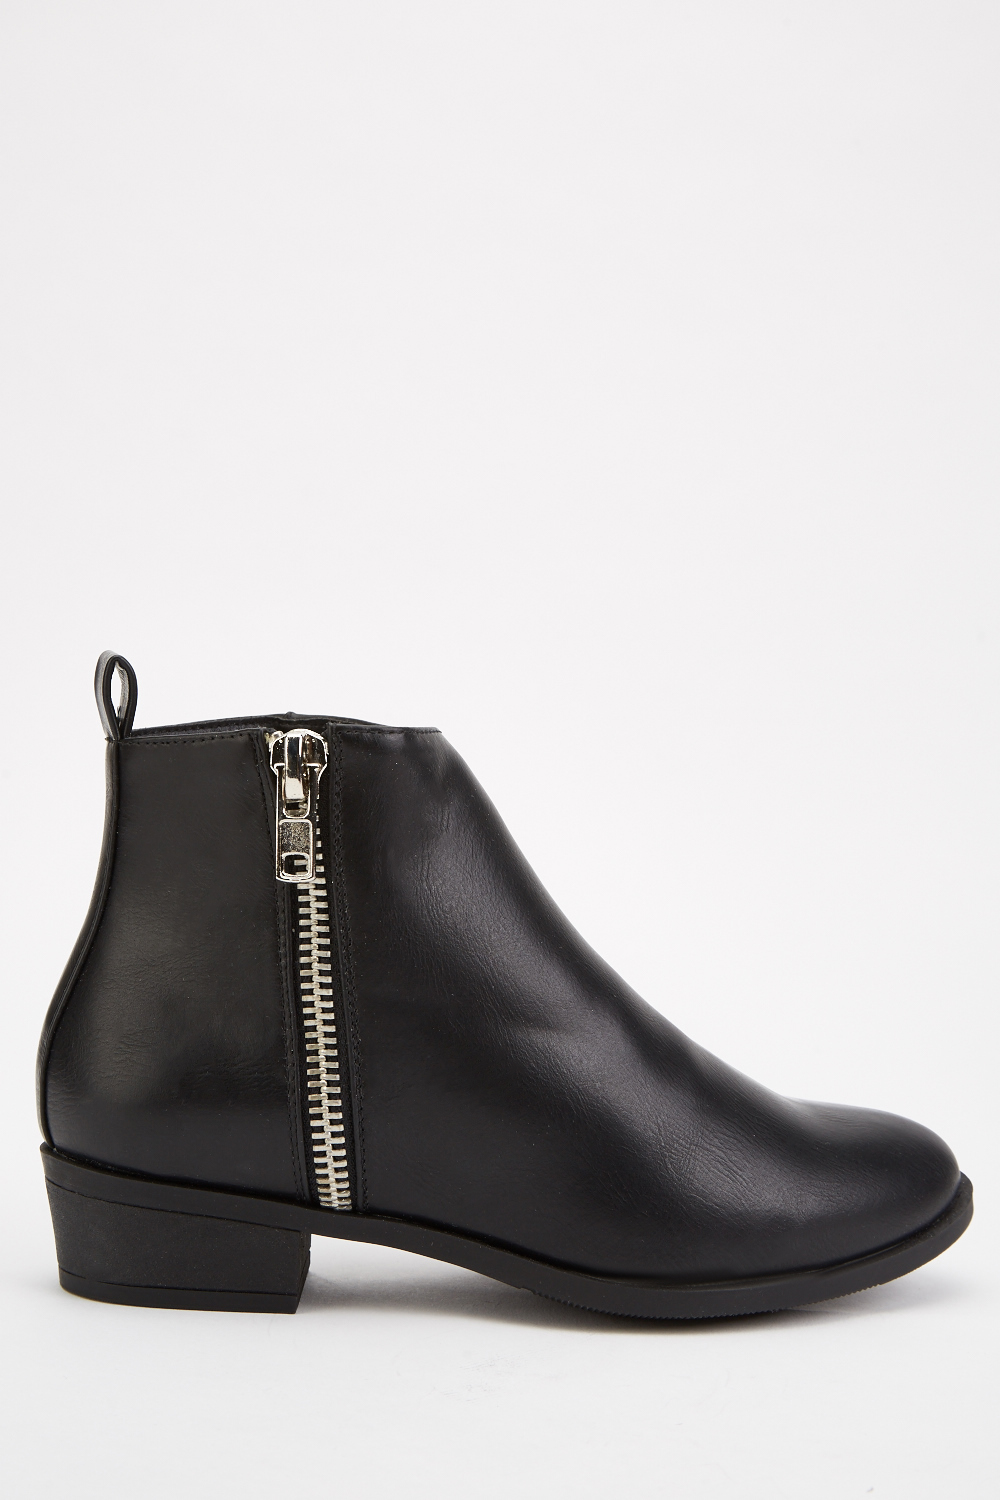 ankle boots with zipper on side